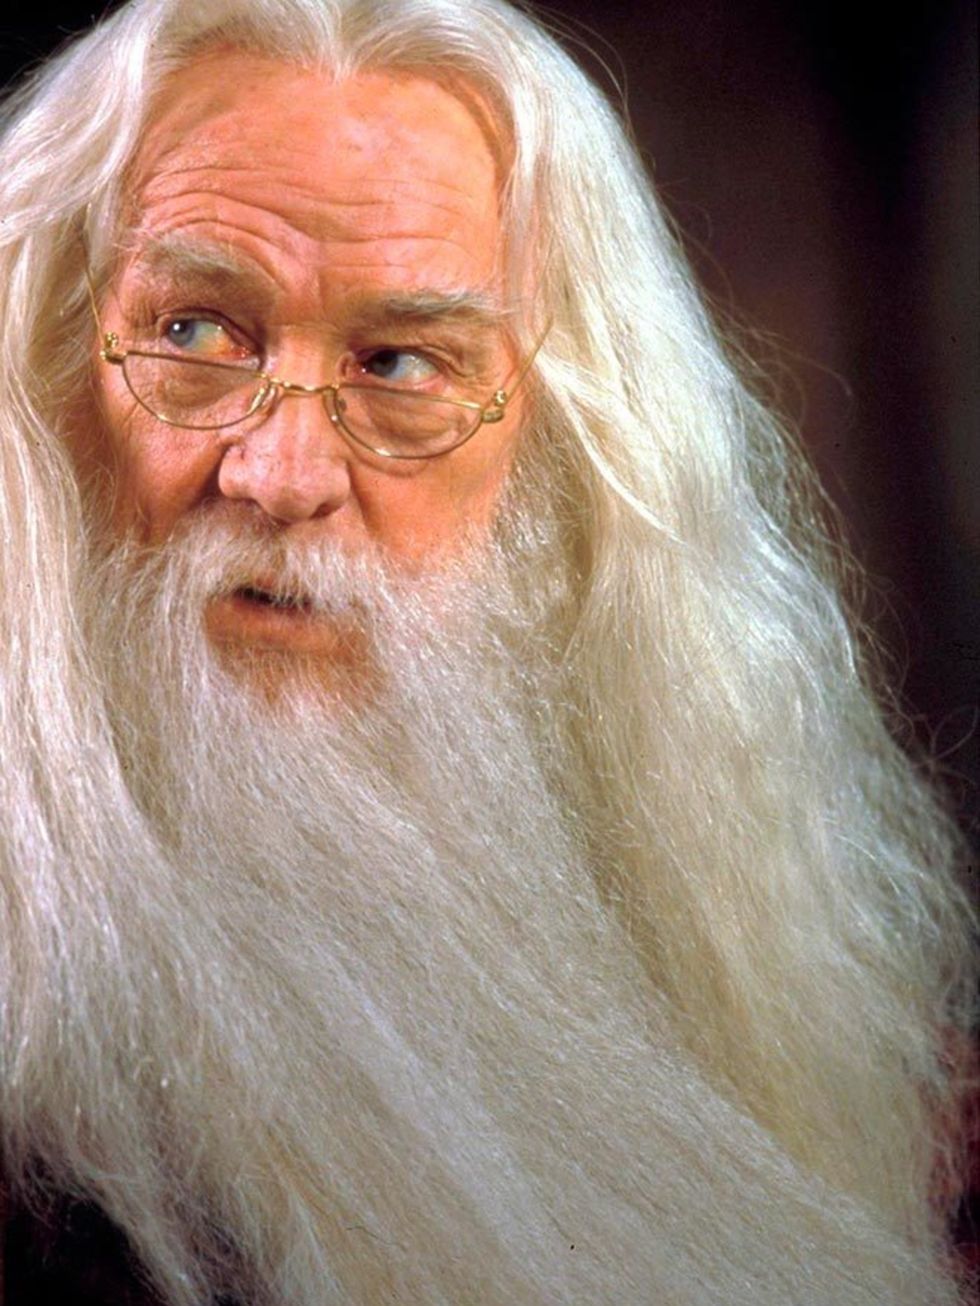 Albus Dumbledore played by Richard Harris